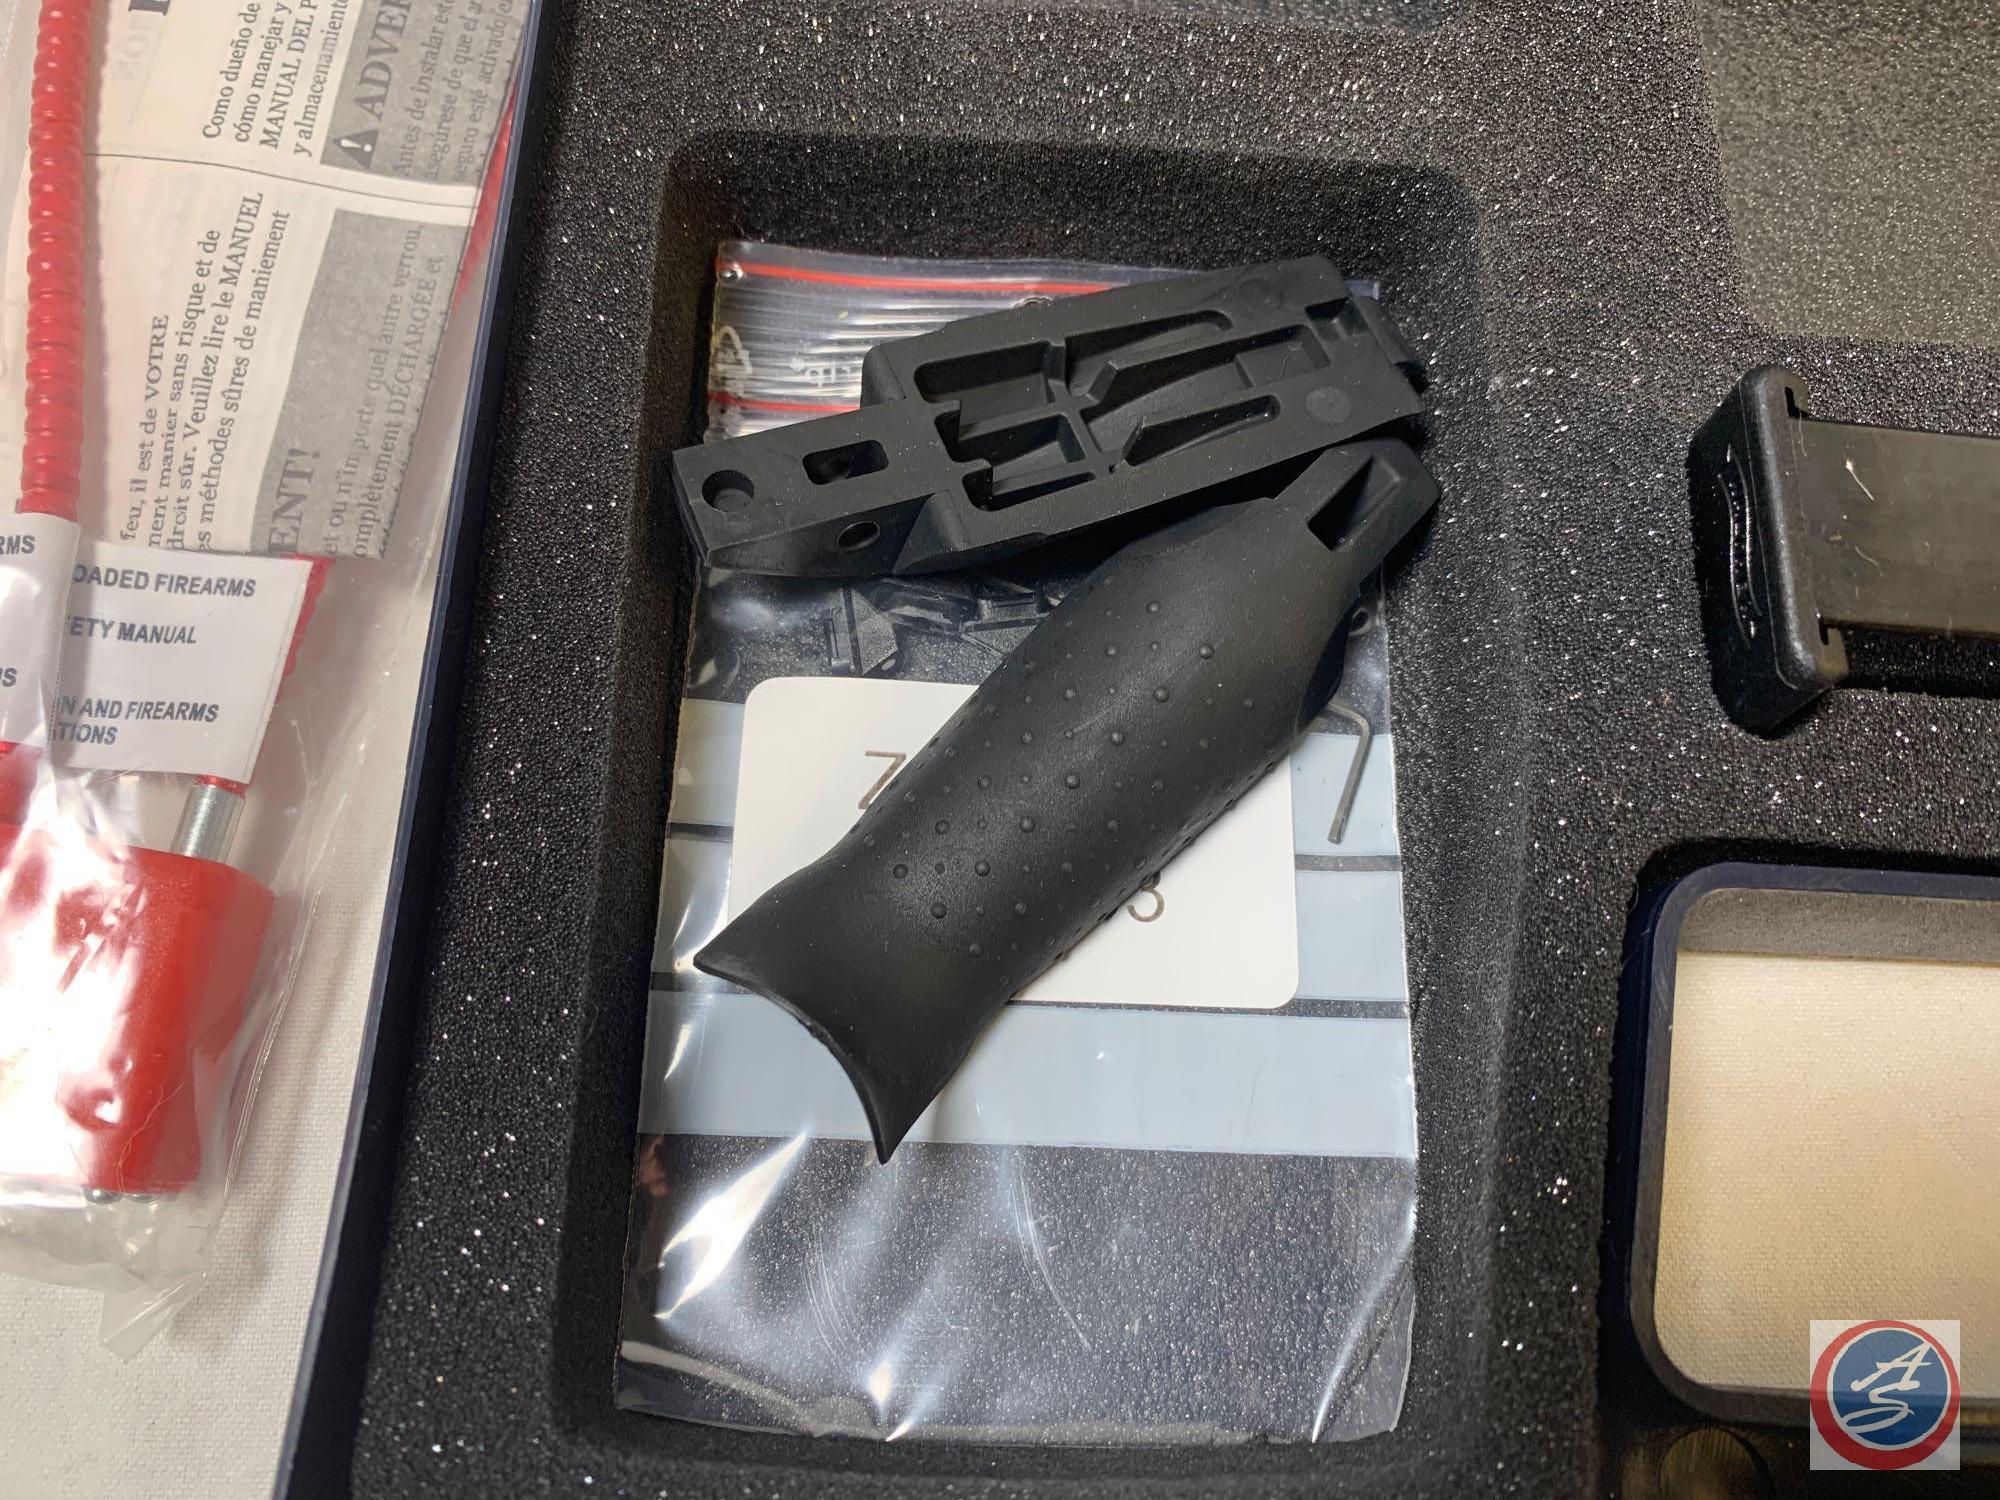 WALTHER Model P99 40 S&W Pistol Semi-Auto...Pistol as new in factory case with 2 magazines Ser #